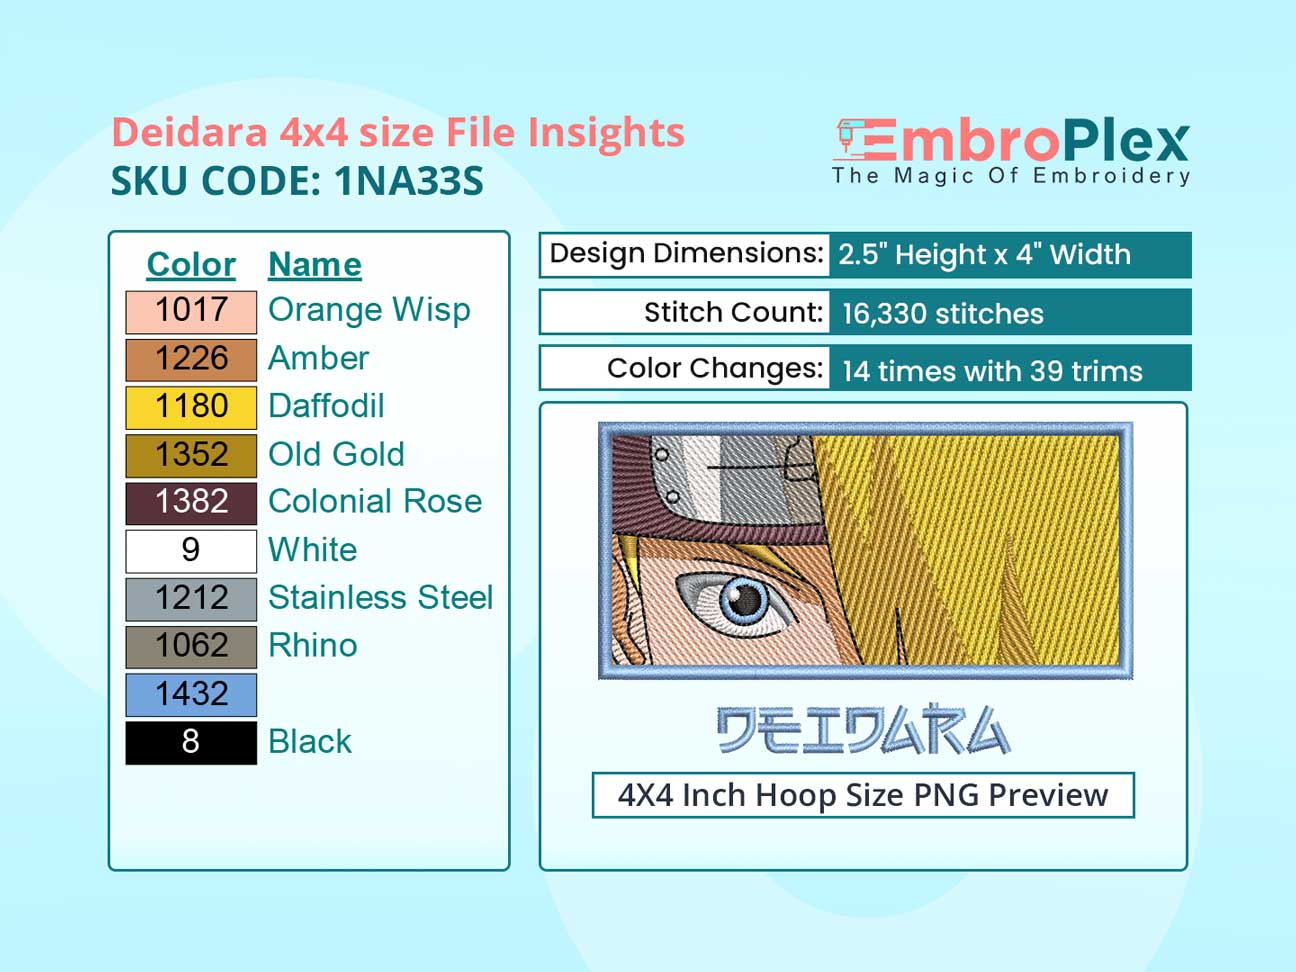 Anime-Inspired Deidara Embroidery Design File - 4x4 Inch hoop Size Variation overview image